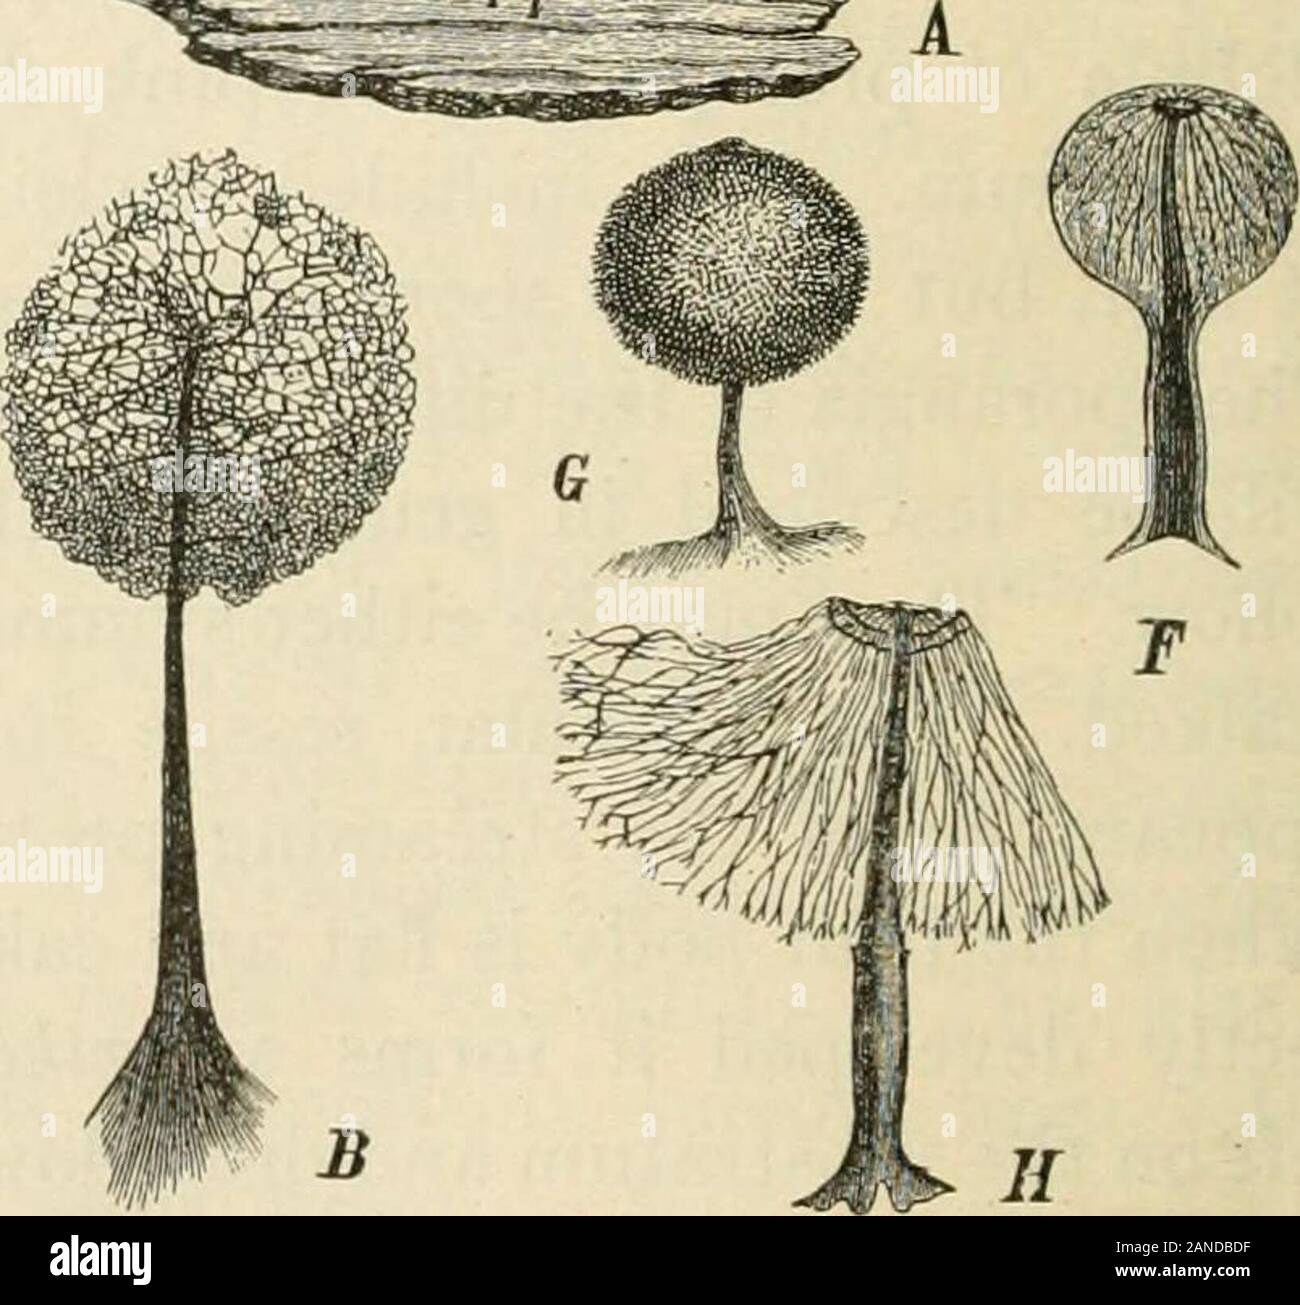 A text-book of mycology and plant pathology . LihmitlL.. Fig. 2.—A, B, Comatricha nigra. A, Sporangium, natural size; B, capillitium,20/1; C, E, Stemonilis fusca; C, sporangium, natural size; D and E, capillitia, 5/1,20/1; F, H, Enerthema papillalum, F, unripe; G, mature sporangium, lo/i; H, capil-litium, 20/1. (C, D, after nature. A, F, G, H, after Roslafinski; B, E, after de Baryin Die natilrlichen Pflanzenfamilien I. i, p. 26.) by the presence of the vacuoles. The sphtting up of the irregular blocksof protoplasm, which have the nuclei irregularly distributed throughthem, proceeds until the Stock Photo